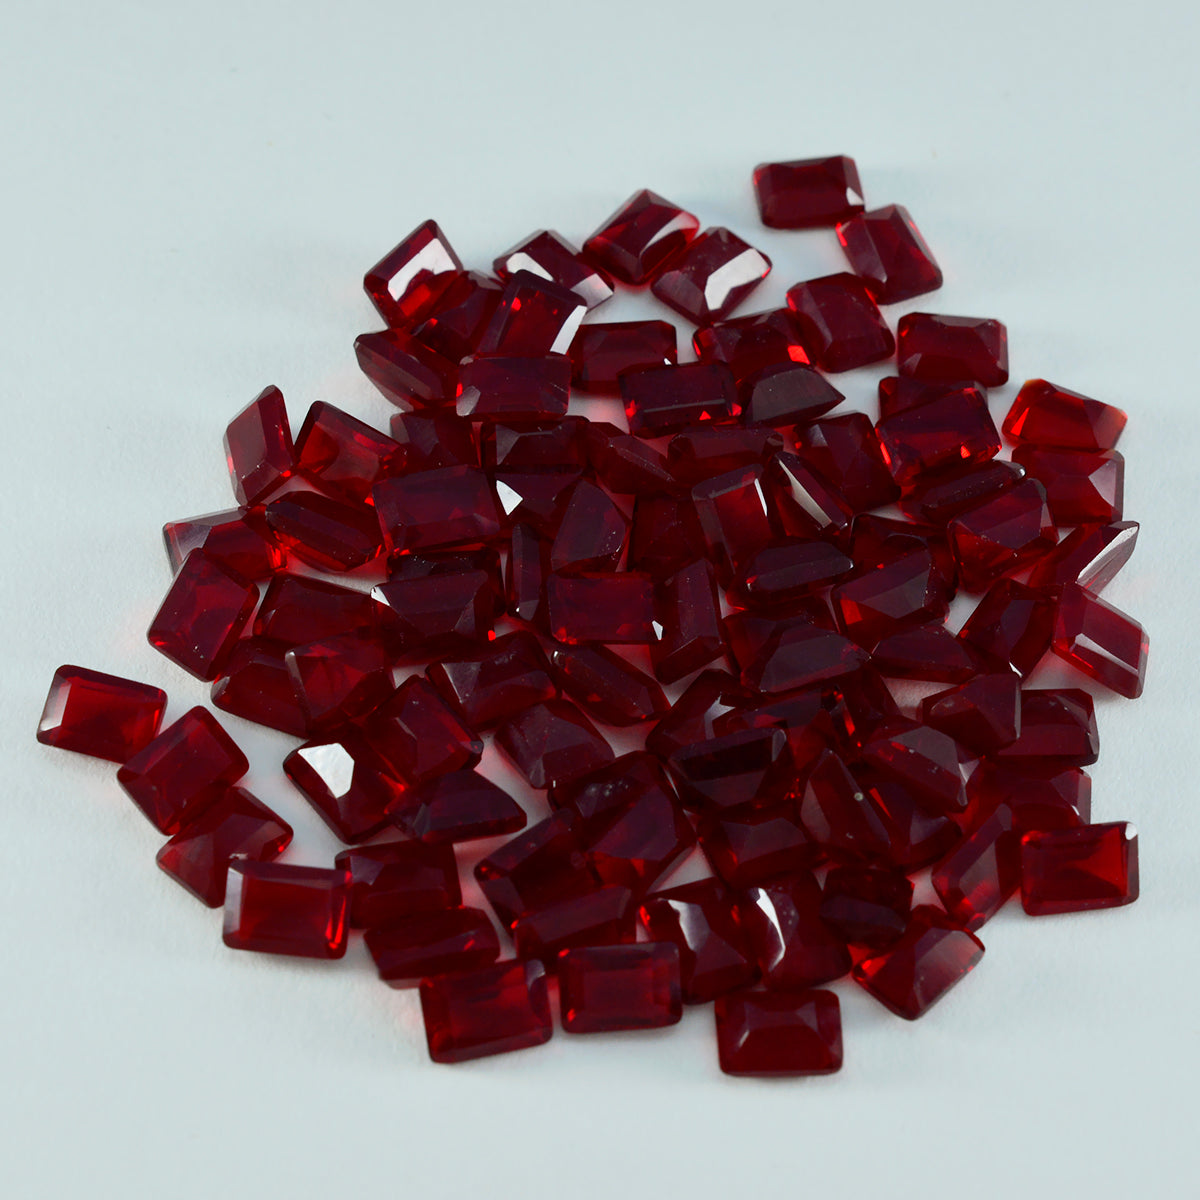 Riyogems 1PC Red Ruby CZ Faceted 4x6 mm Octagon Shape handsome Quality Loose Gemstone